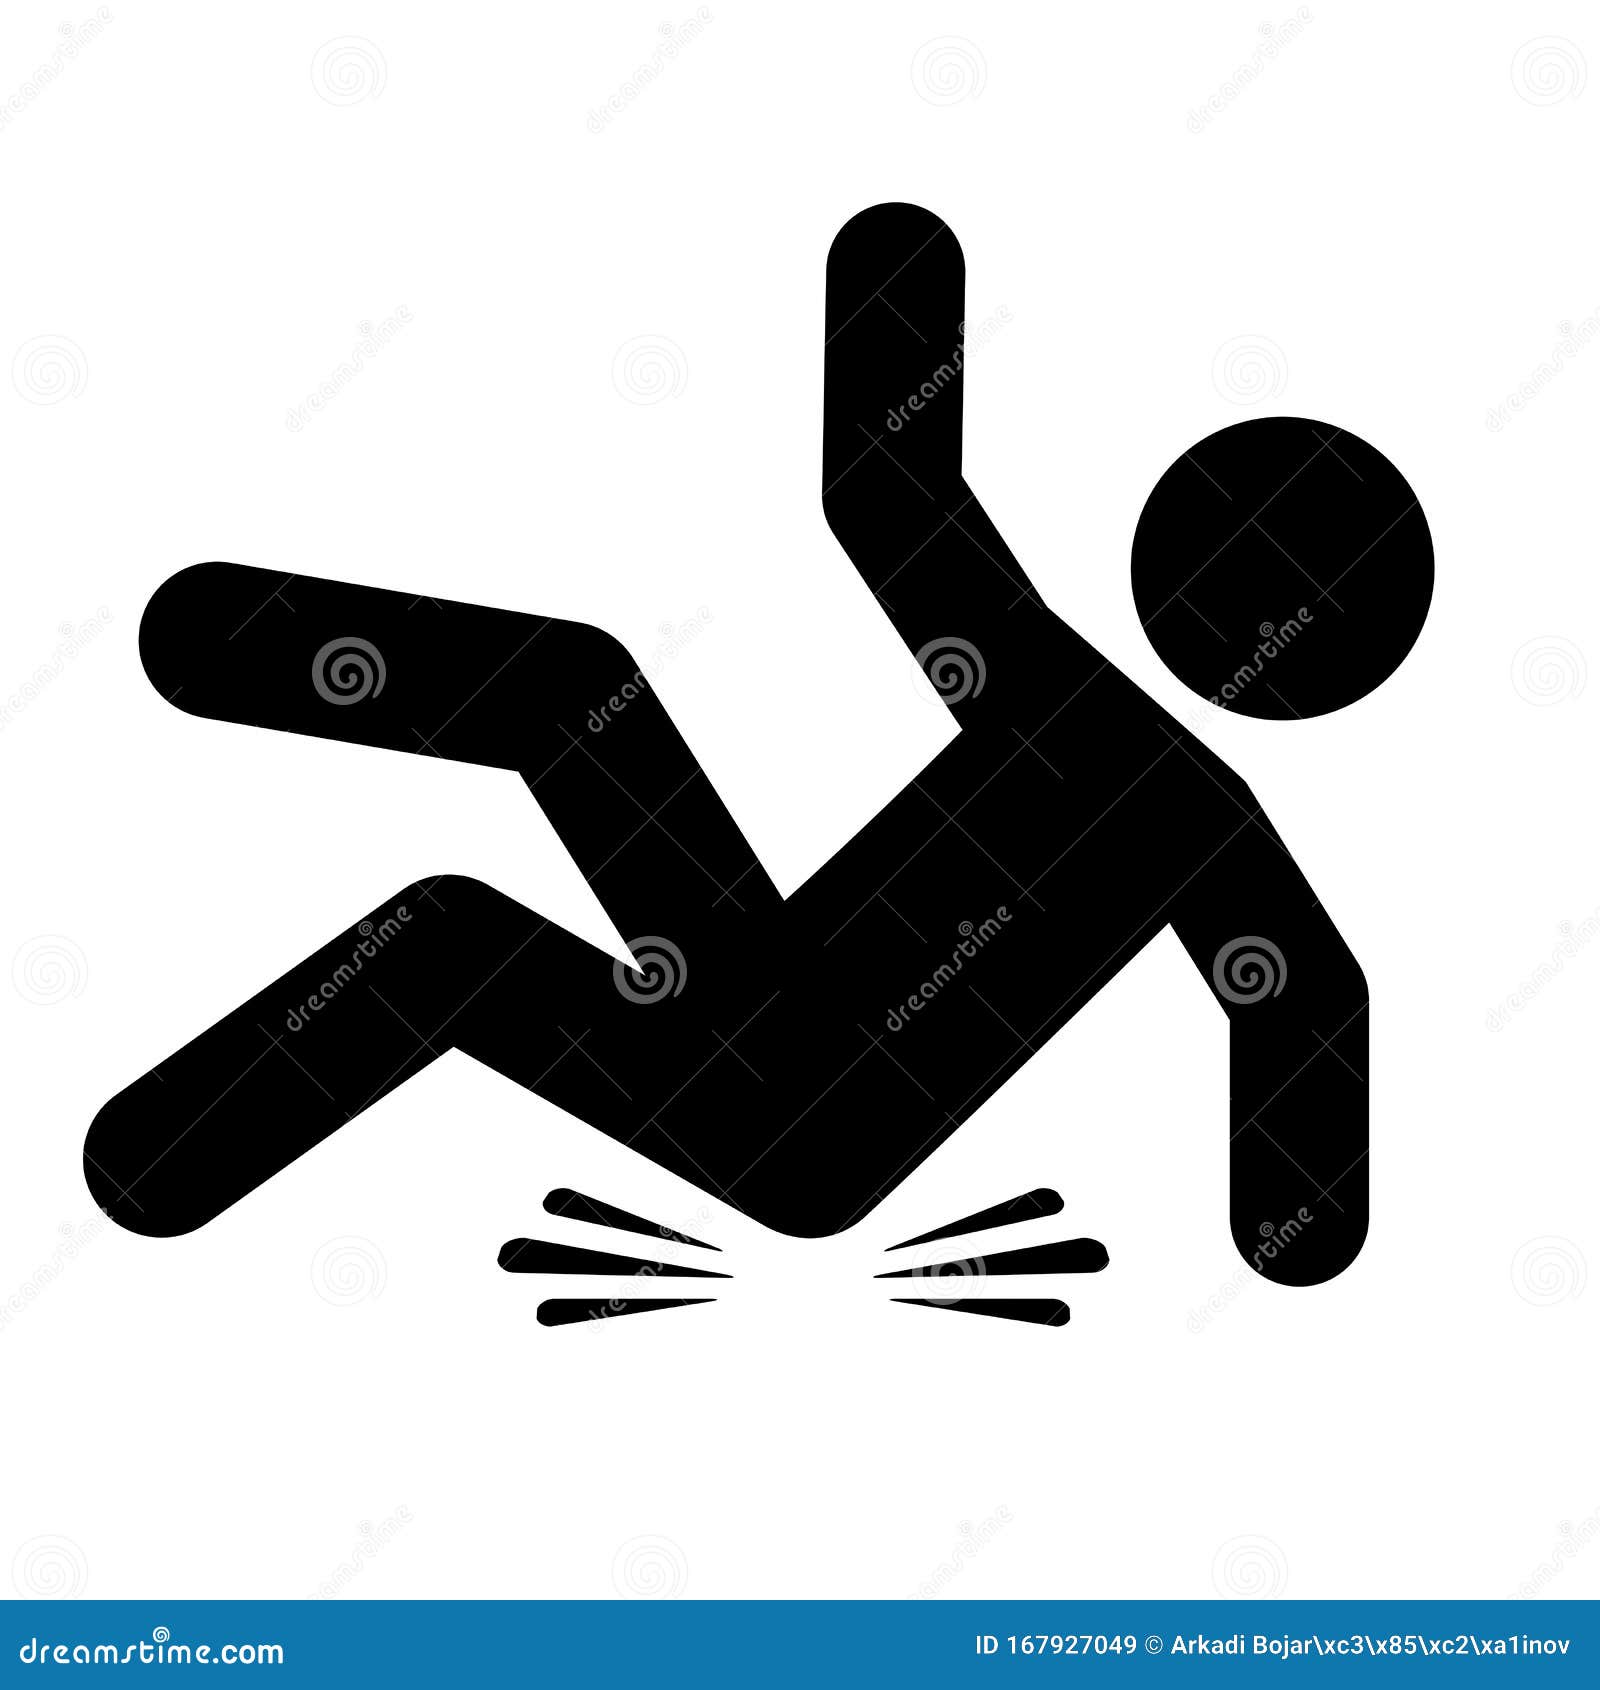 https://thumbs.dreamstime.com/z/slip-fall-vector-icon-slip-fall-vector-icon-isolated-white-background-167927049.jpg